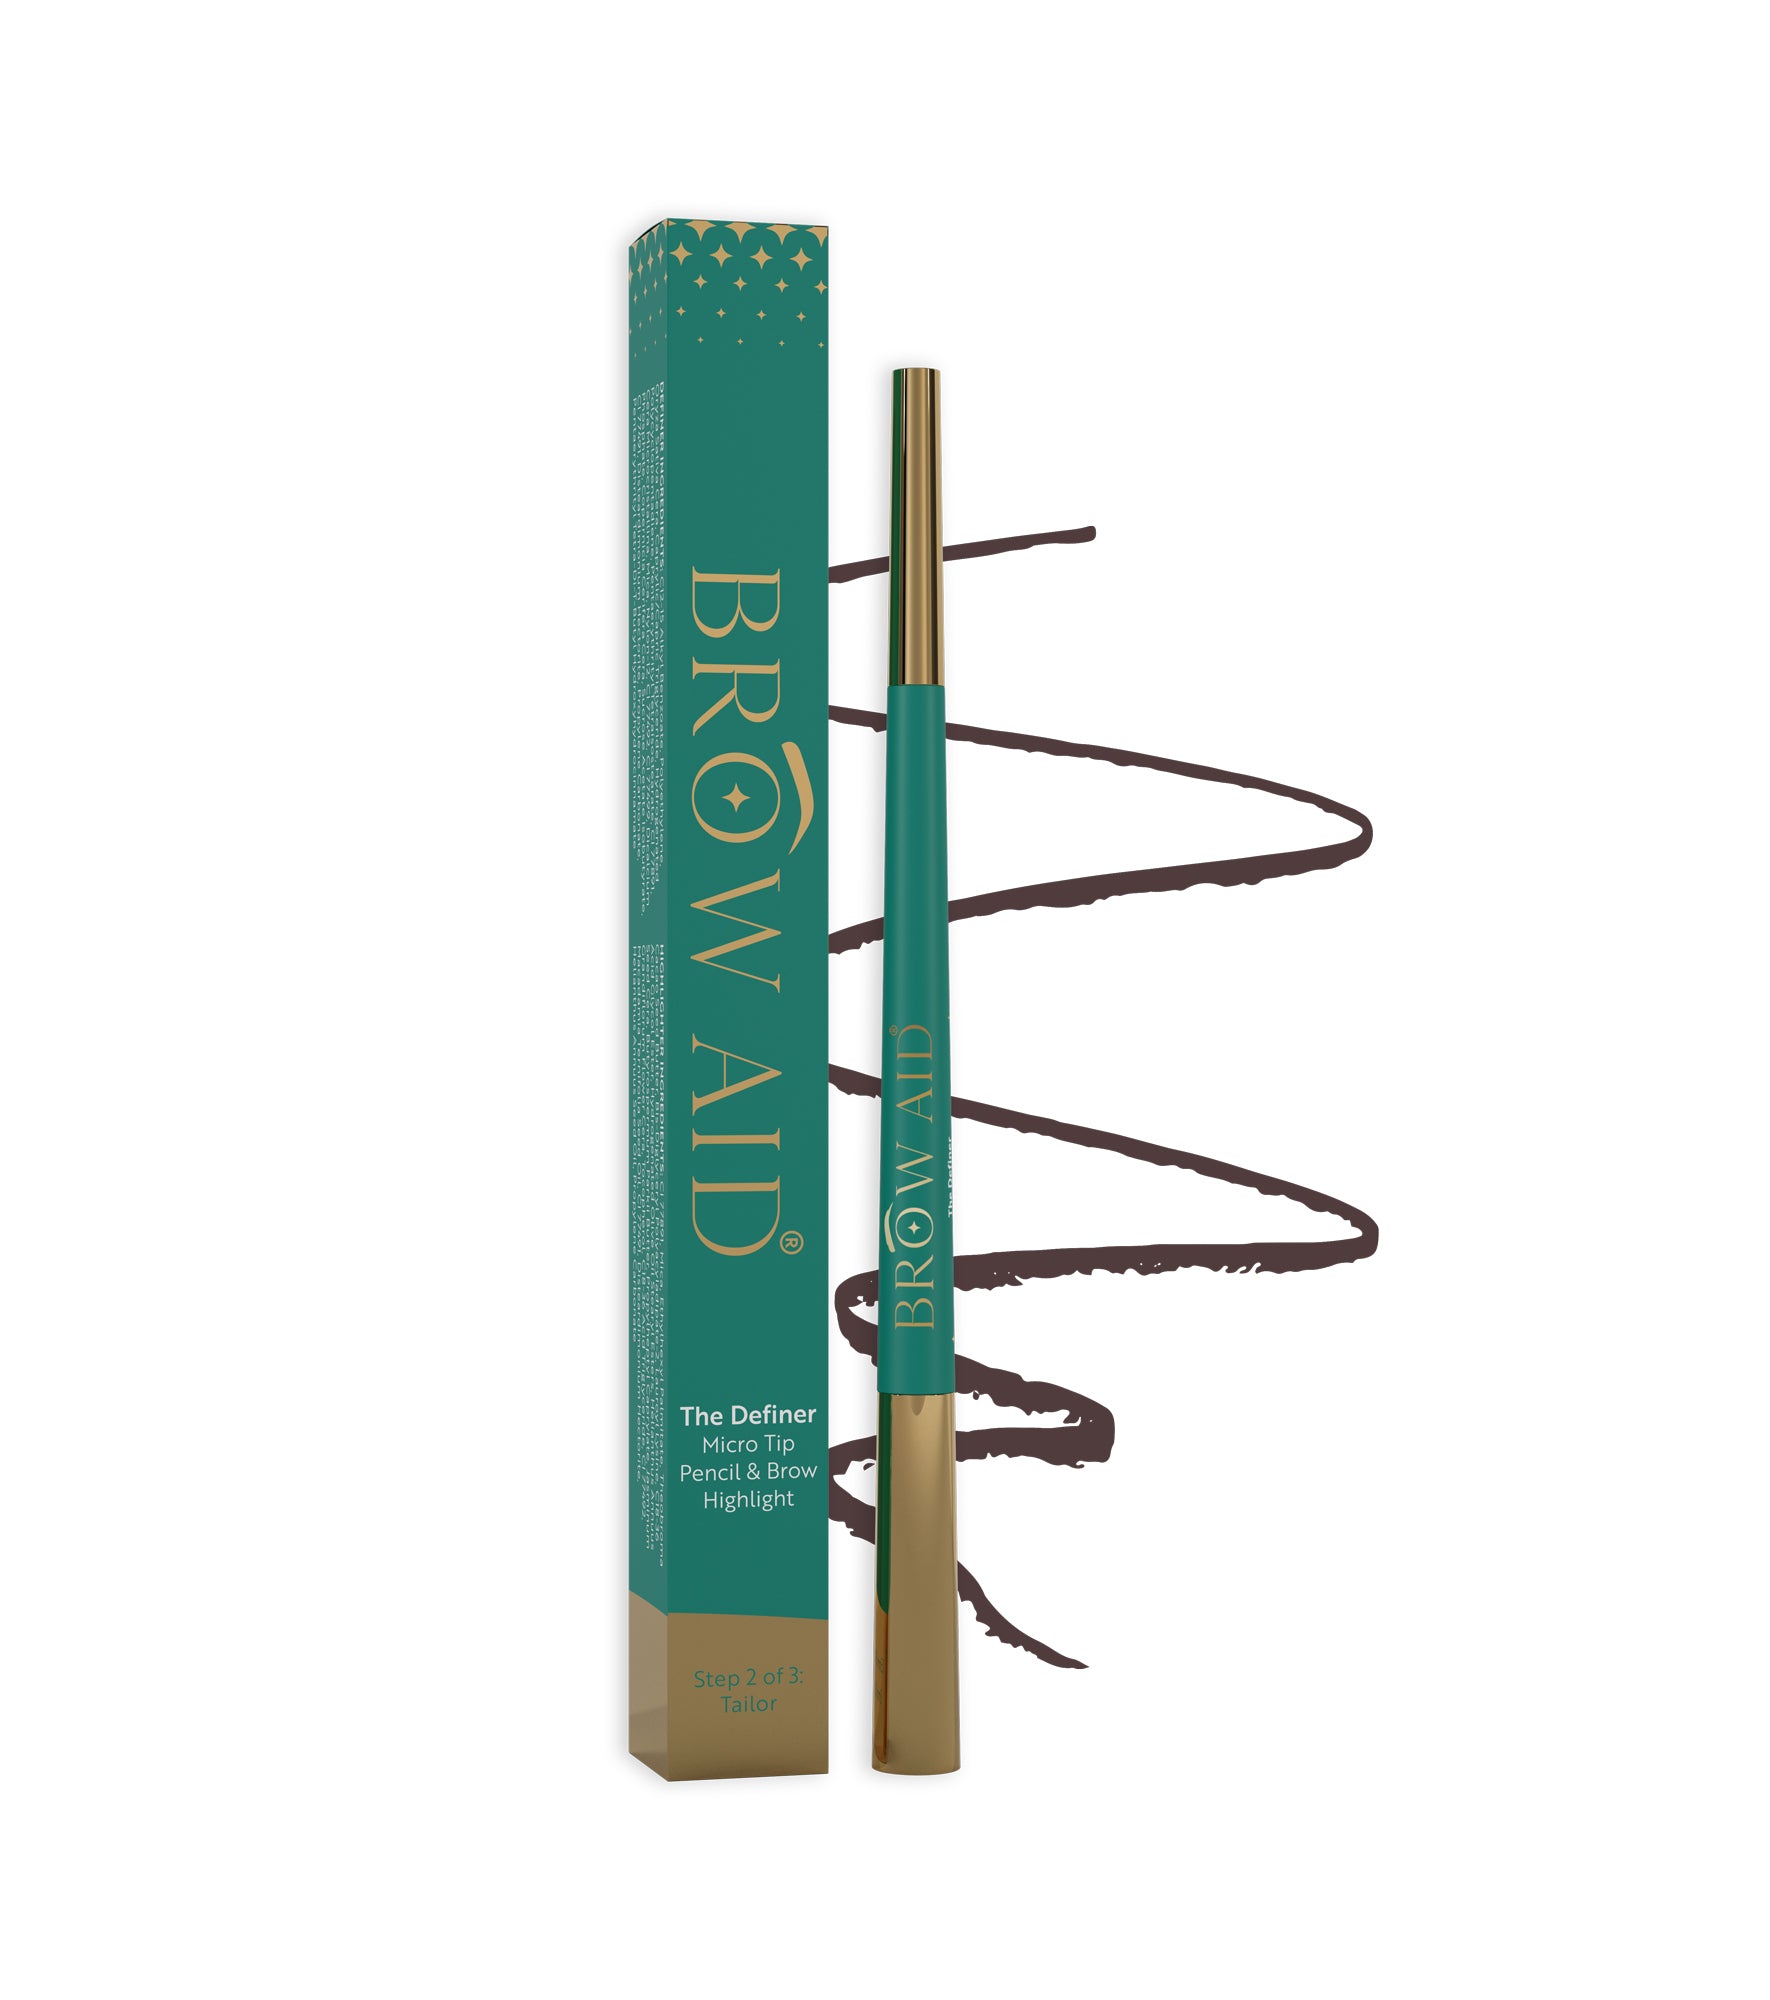 Brow Aid The Definer Brow Pencil & Highlight